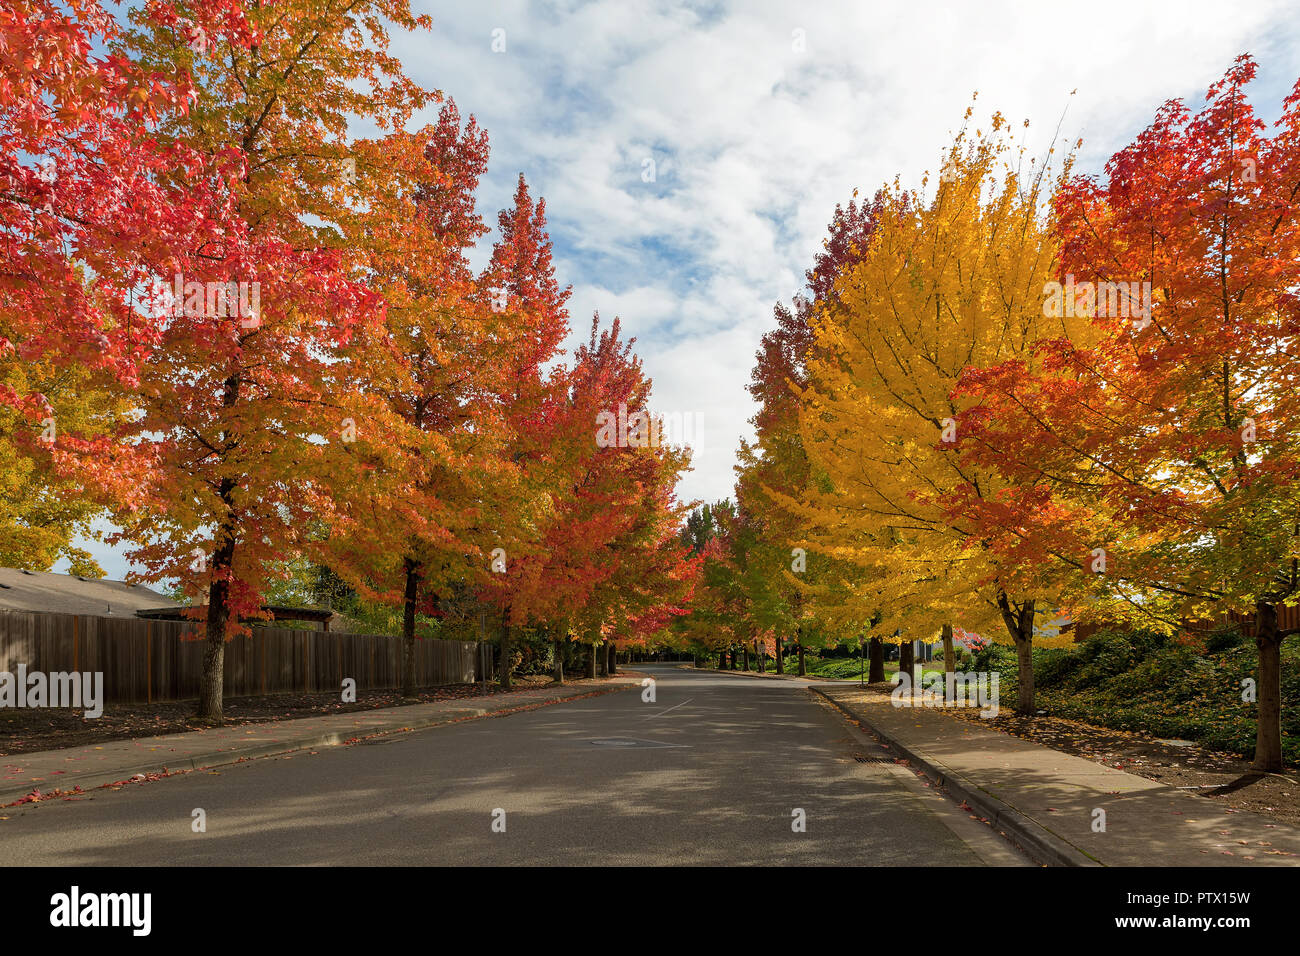 American Sweetgum trees canopy lined winding street with fall foliage during autumn season in Oregon Stock Photo